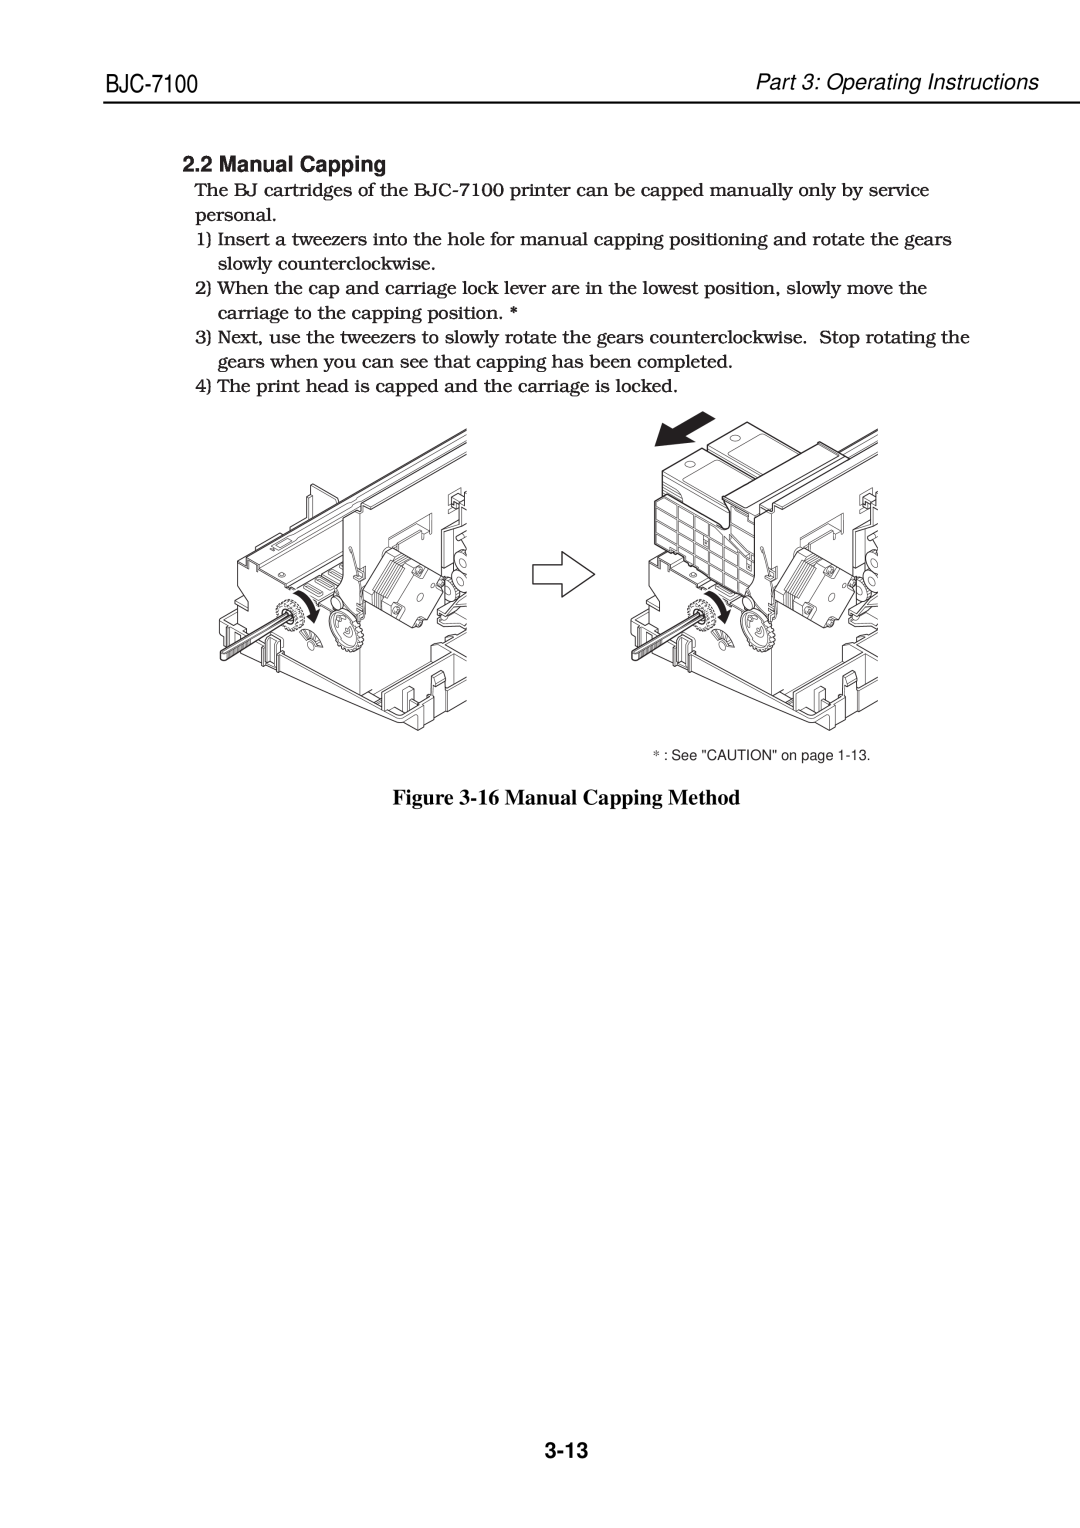 Canon QY8-1360-000 manual 16 Manual Capping Method, 3-13, BJC-7100, Part 3 Operating Instructions 